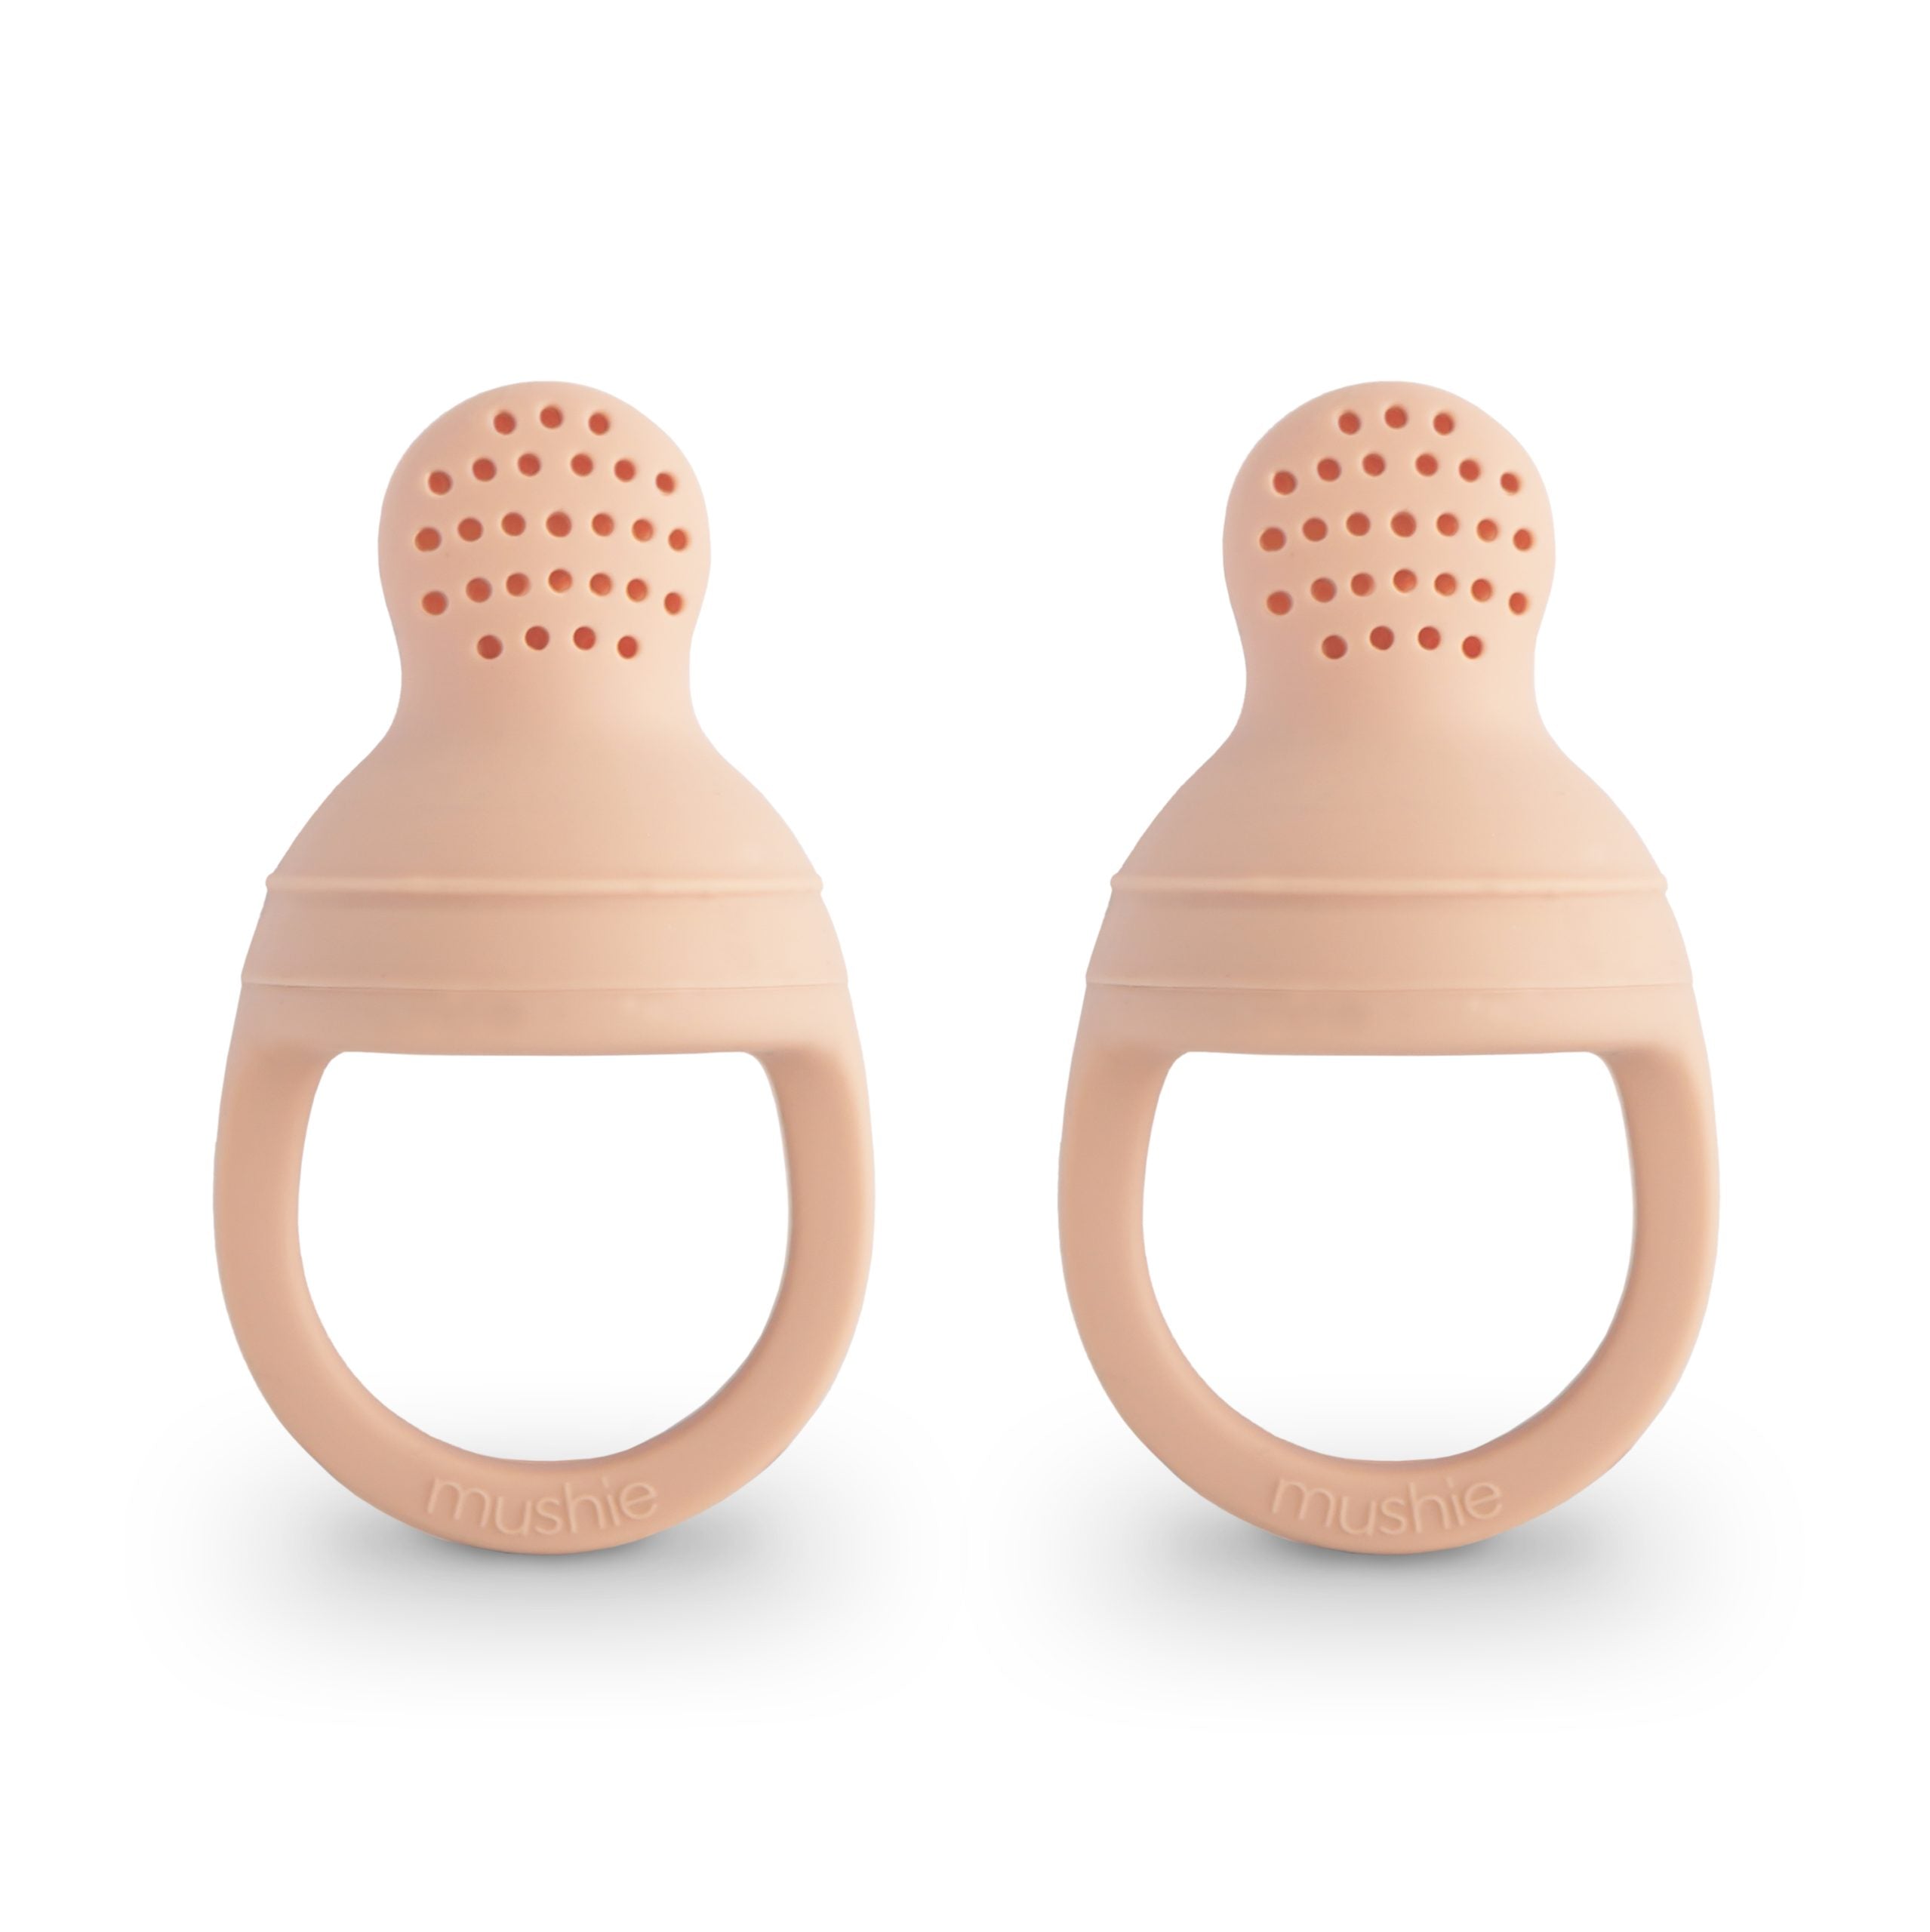 Tétine alimentaire en silicone Mushie - Rose